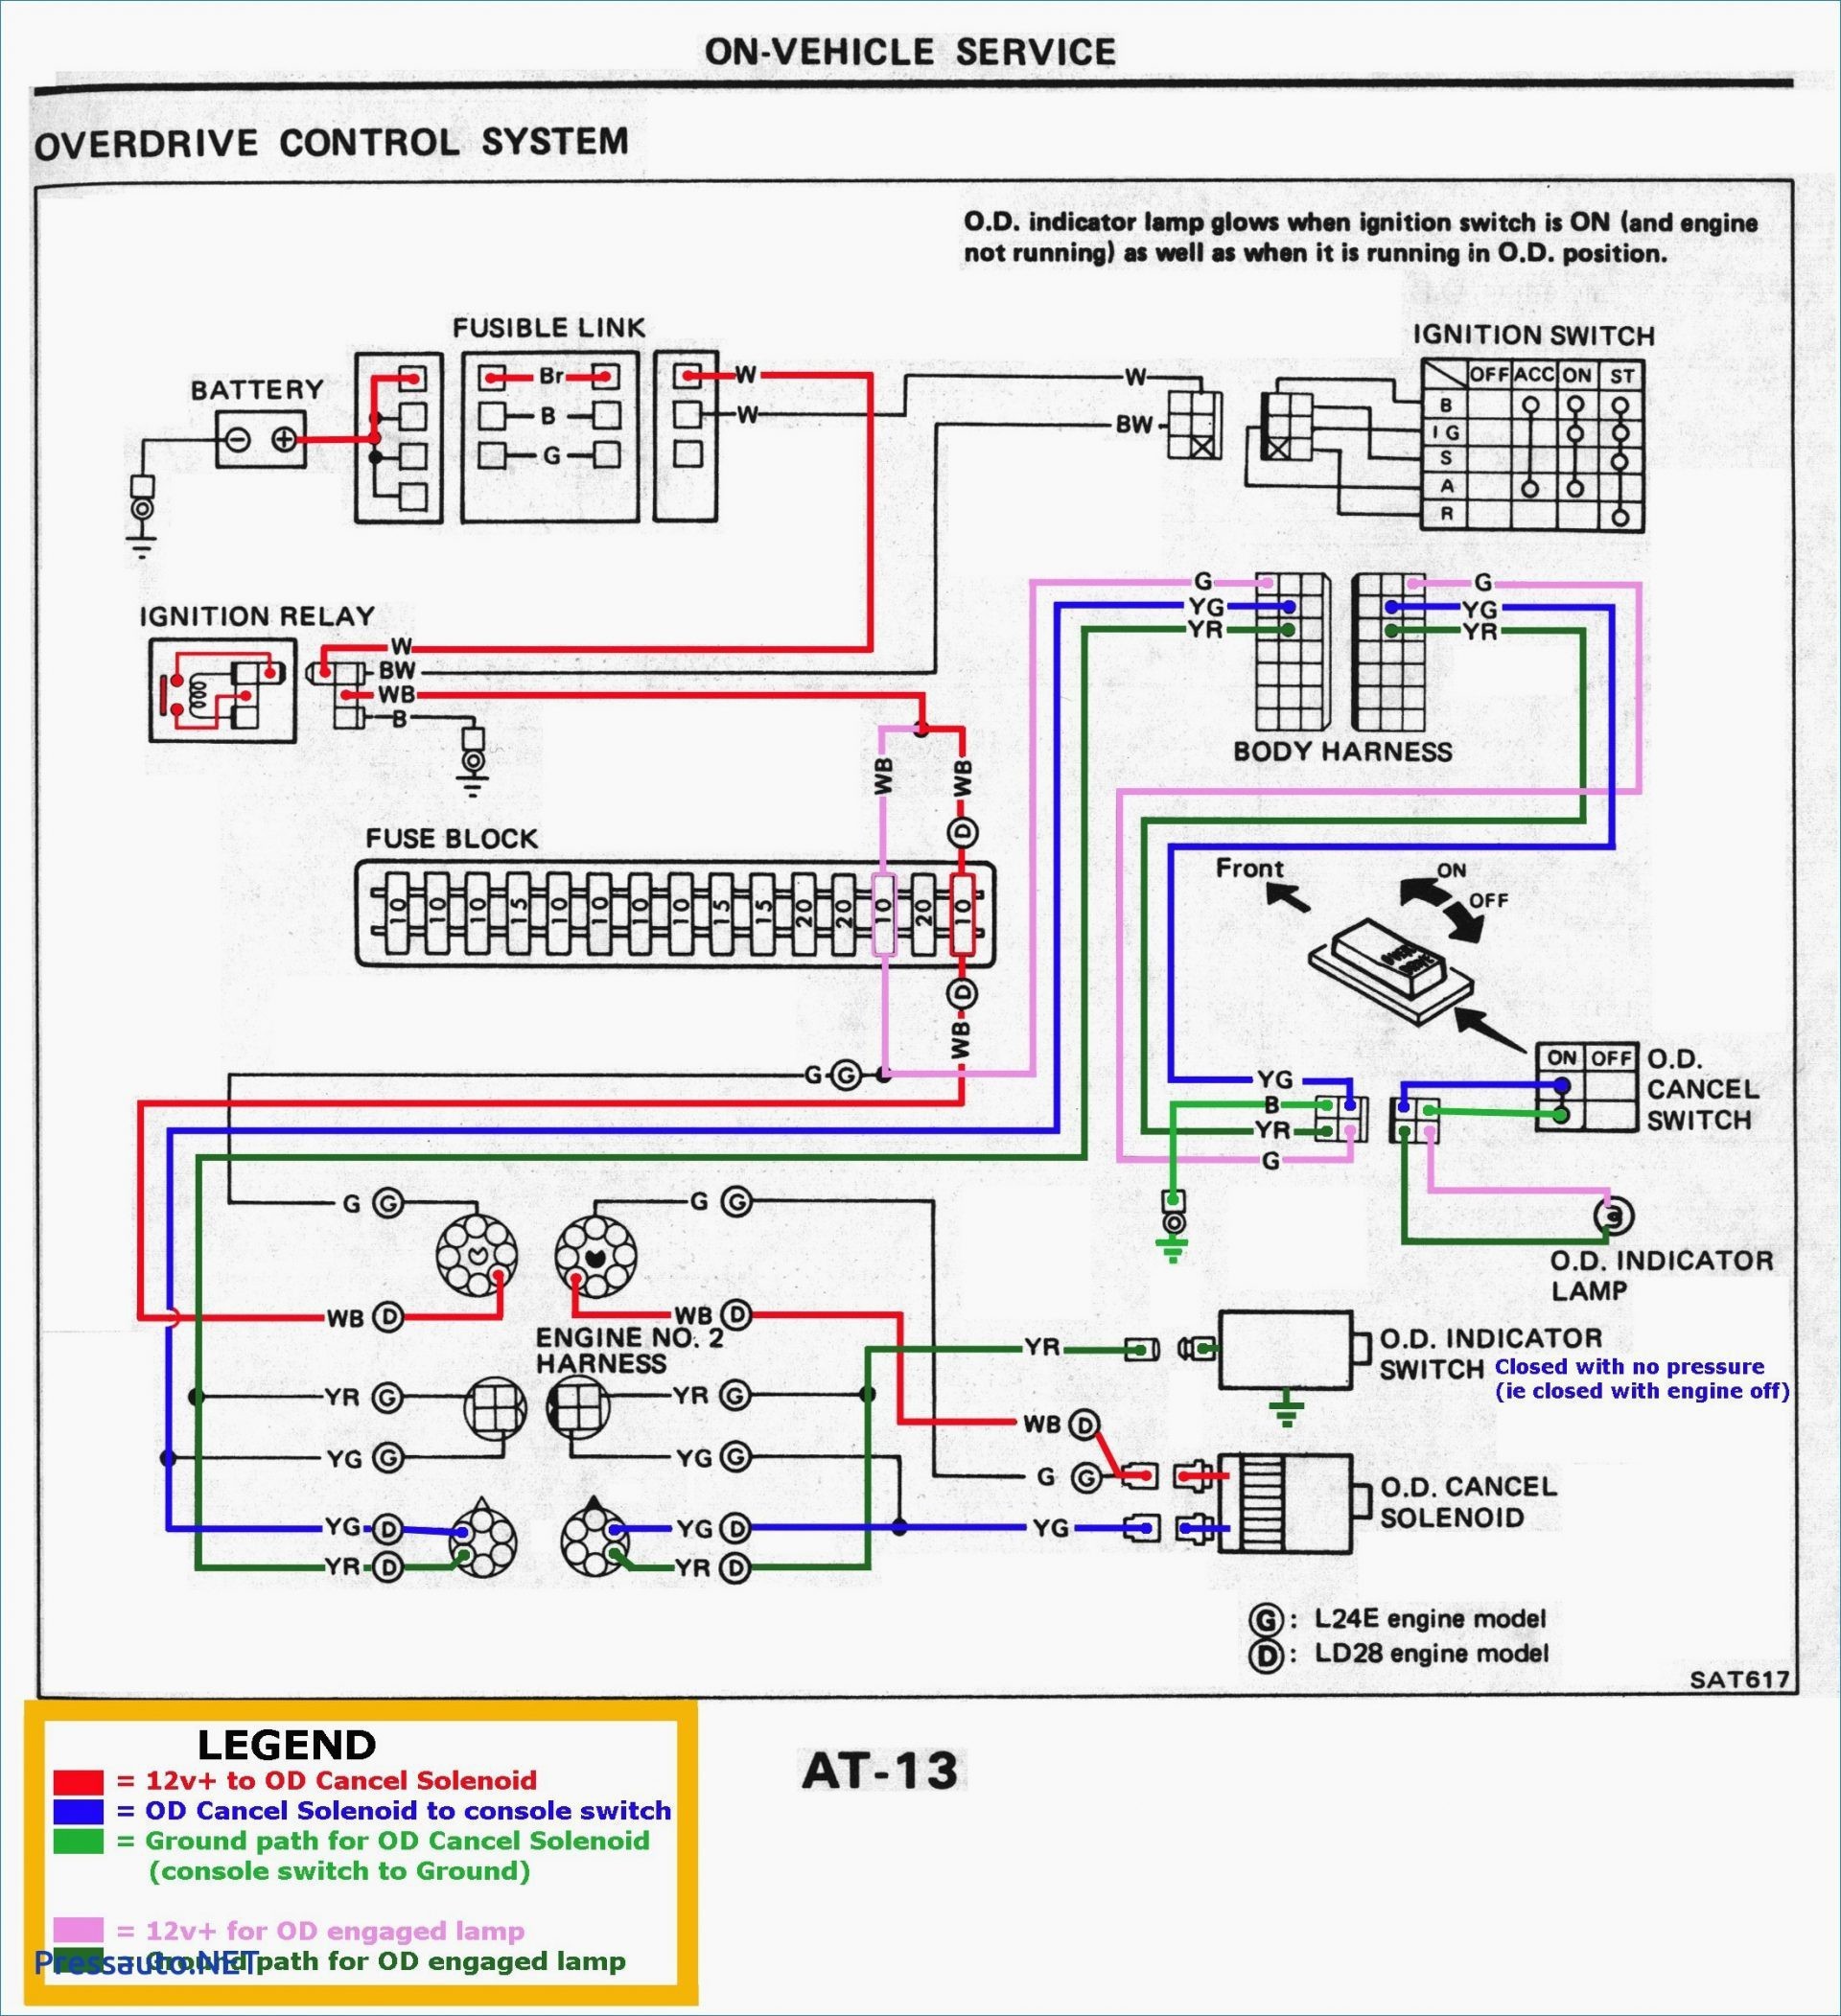 How To Wire A House For Electricity Diagram Fresh House Electrical Wiring Diagram Australia Valid Wiring Diagram Fresh